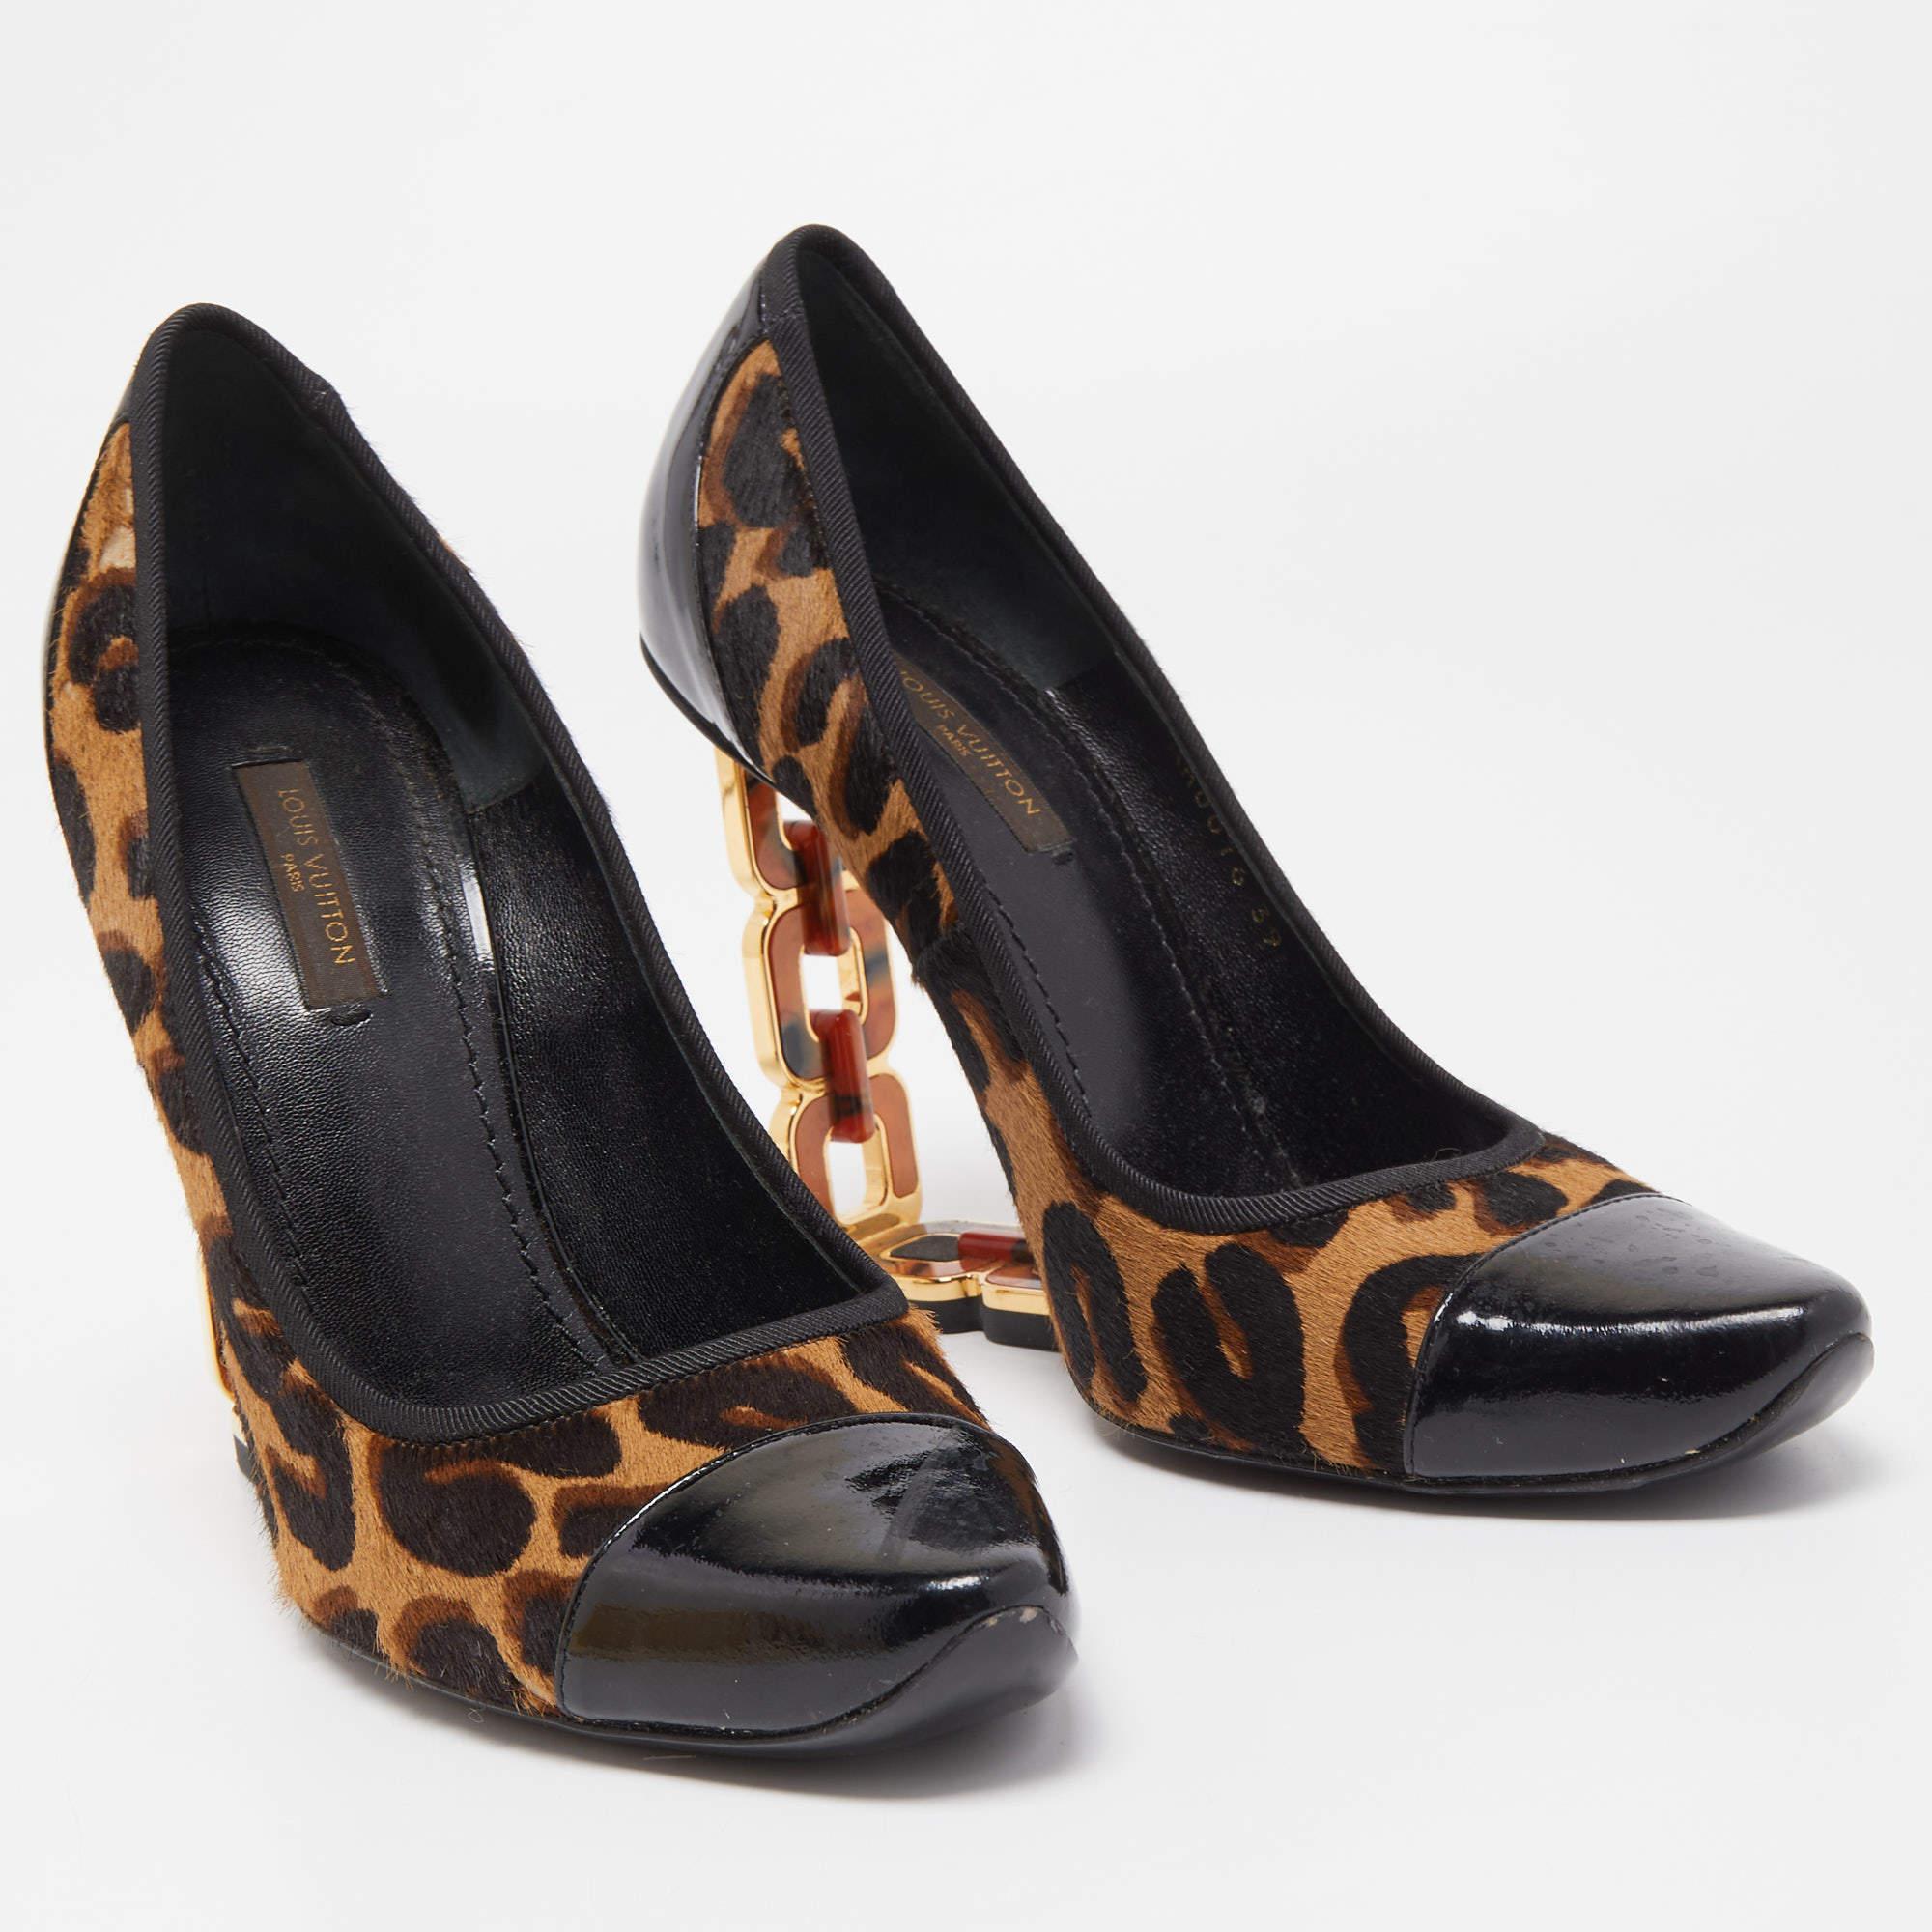 Perfectly sewn and finished to ensure an elegant look and fit, these Louis Vuitton pumps are a purchase you'll love flaunting. They look great on the feet.

Includes
Original Dustbag